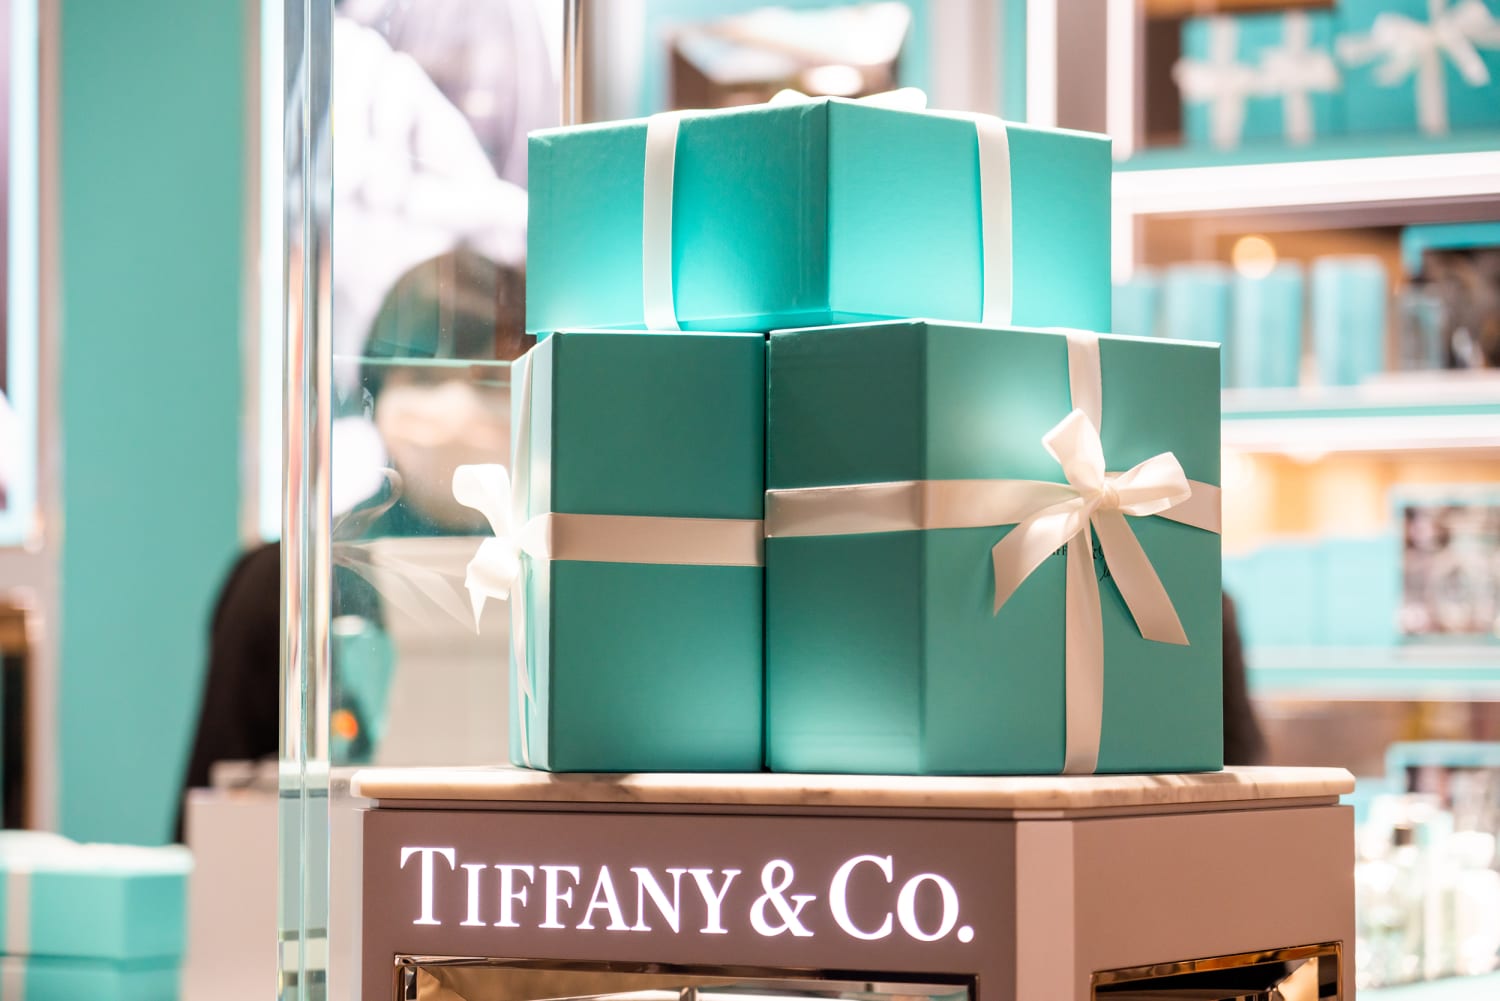 Tiffany & Co. Has Transformed Their Iconic Shopping Bag Into